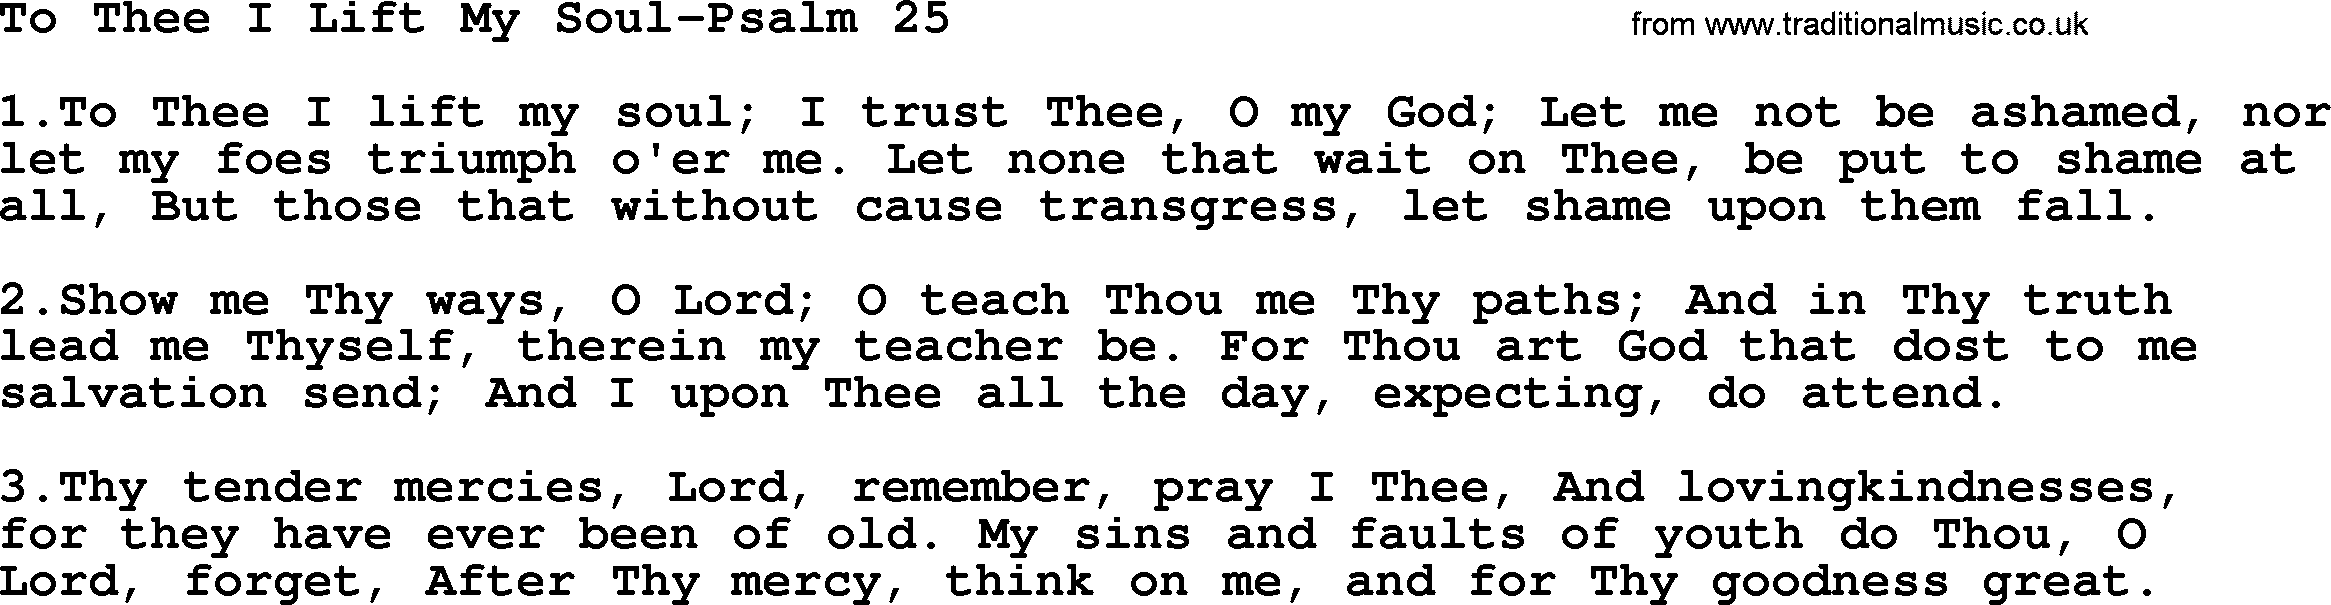 Hymns from the Psalms, Hymn: To Thee I Lift My Soul-Psalm 25, lyrics with PDF